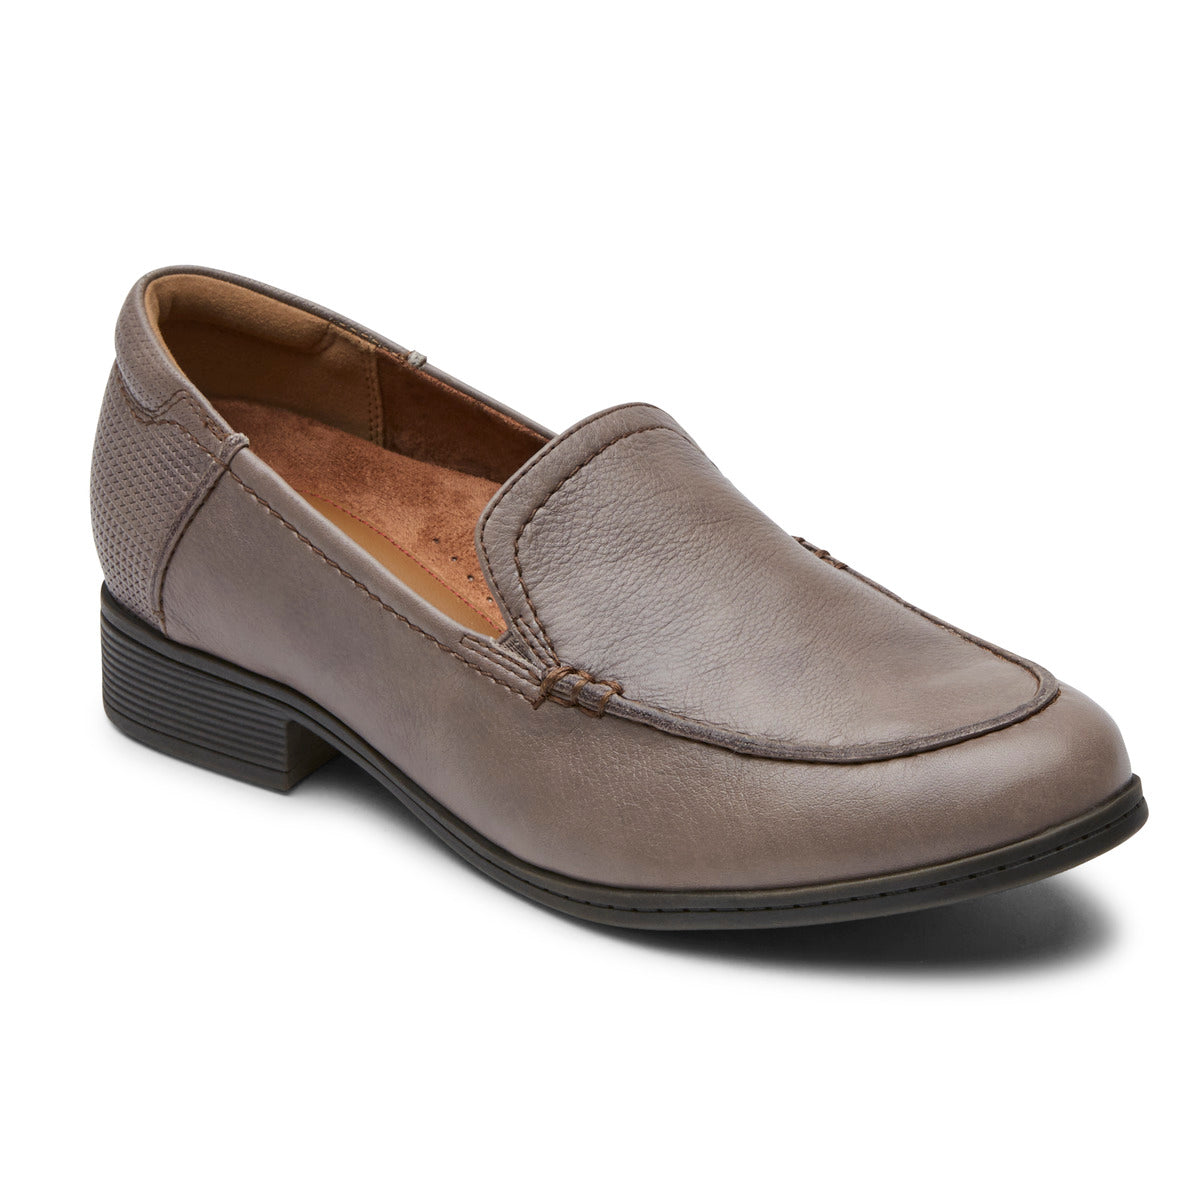 Cobb Hill Womens Crosbie Moc Loafer